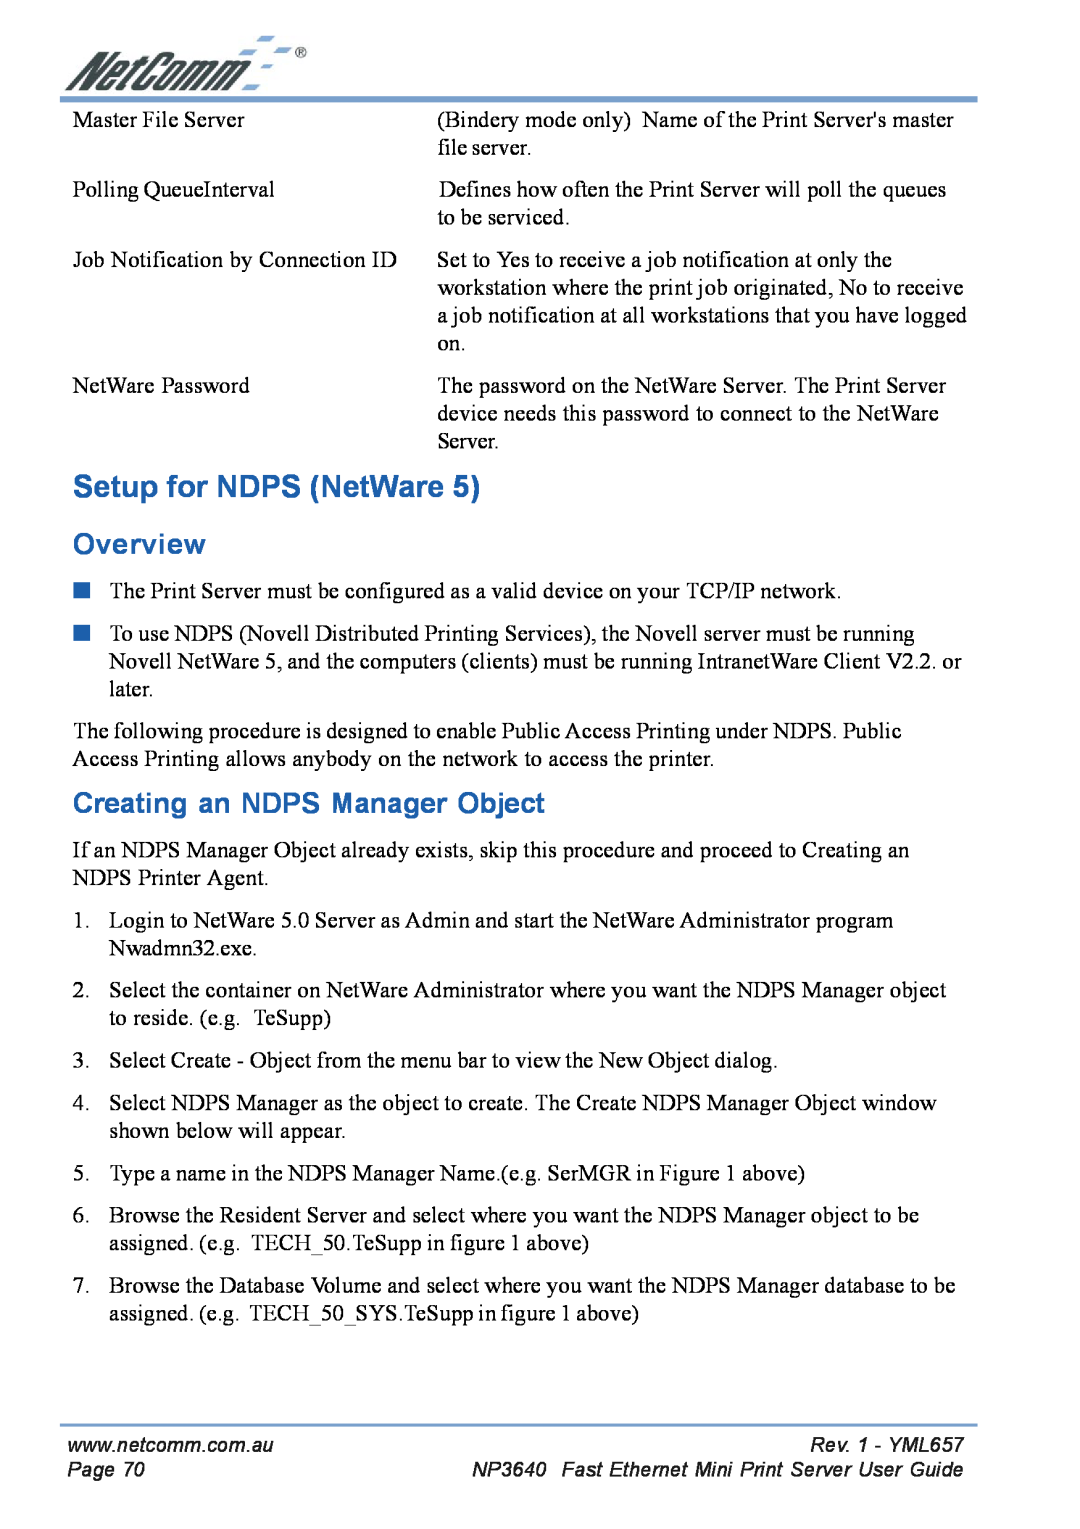 NetComm NP3640 manual Setup for NDPS NetWare, Overview, Creating an NDPS Manager Object 